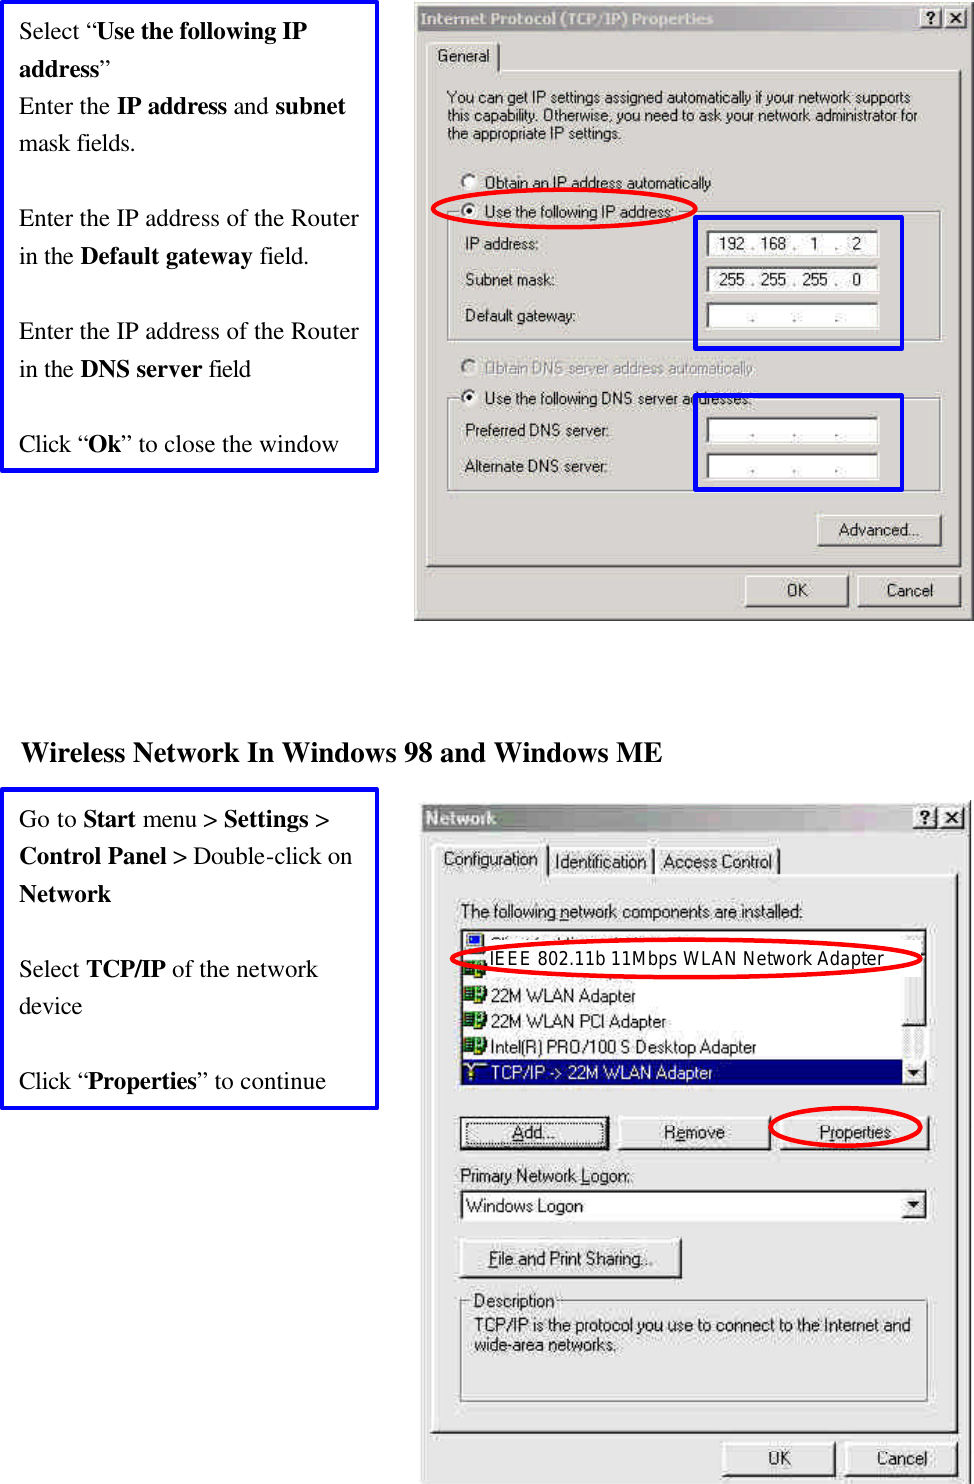  36                      Wireless Network In Windows 98 and Windows ME                Select “Use the following IP address” Enter the IP address and subnet mask fields.  Enter the IP address of the Router in the Default gateway field.  Enter the IP address of the Router in the DNS server field  Click “Ok” to close the window Go to Start menu &gt; Settings &gt; Control Panel &gt; Double-click on Network  Select TCP/IP of the network device  Click “Properties” to continue IEEE 802.11b 11Mbps WLAN Network Adapter 